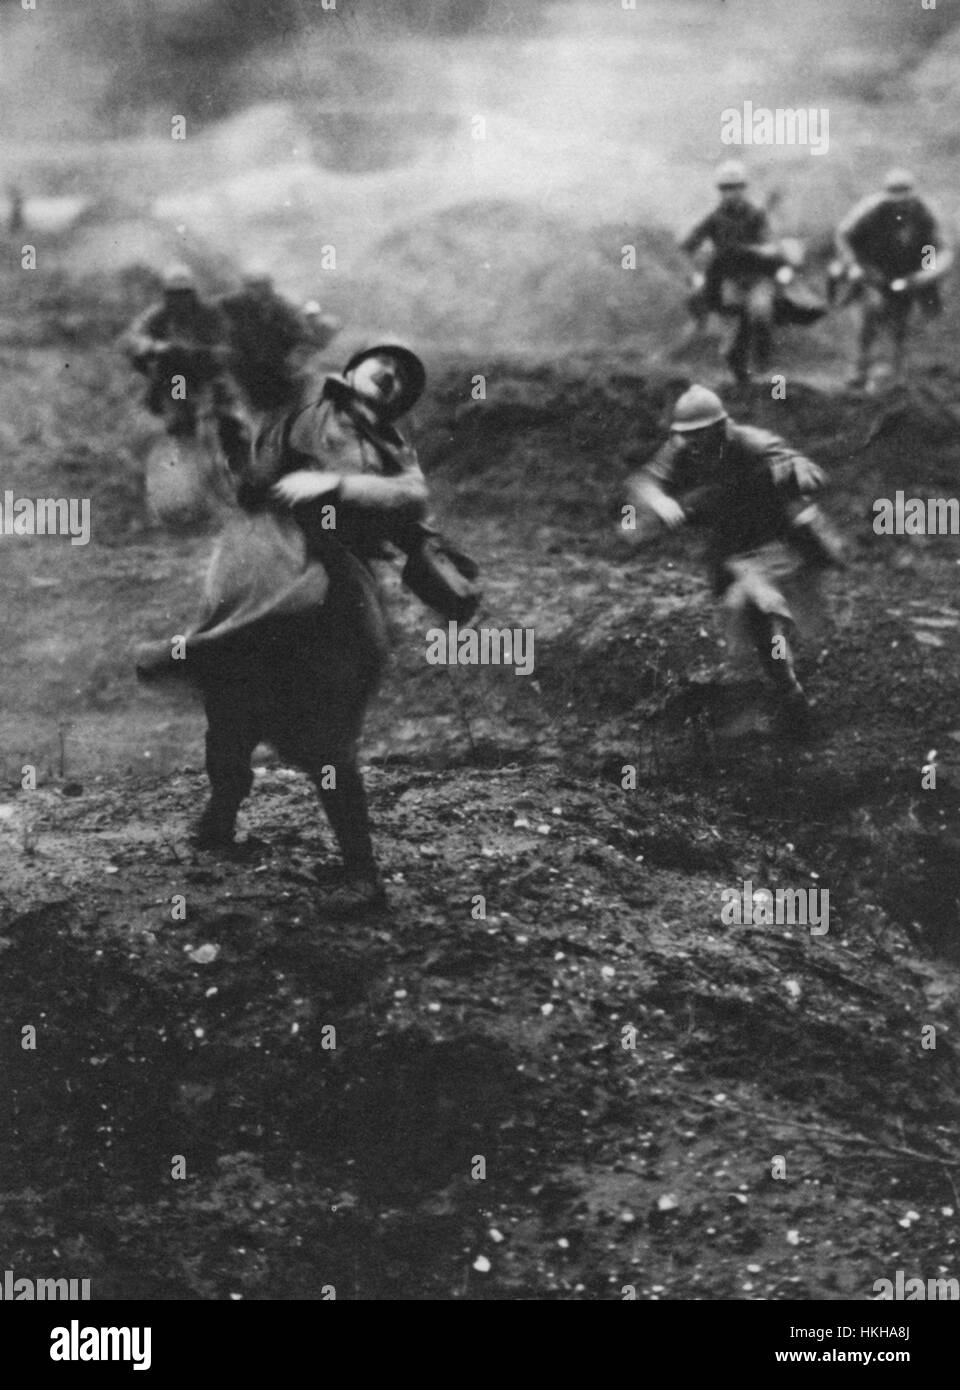 BATTLE OF VERDUN February-December 1916. The famous sometimes disputed photo of a French soldier being hit during an attach. Stock Photo